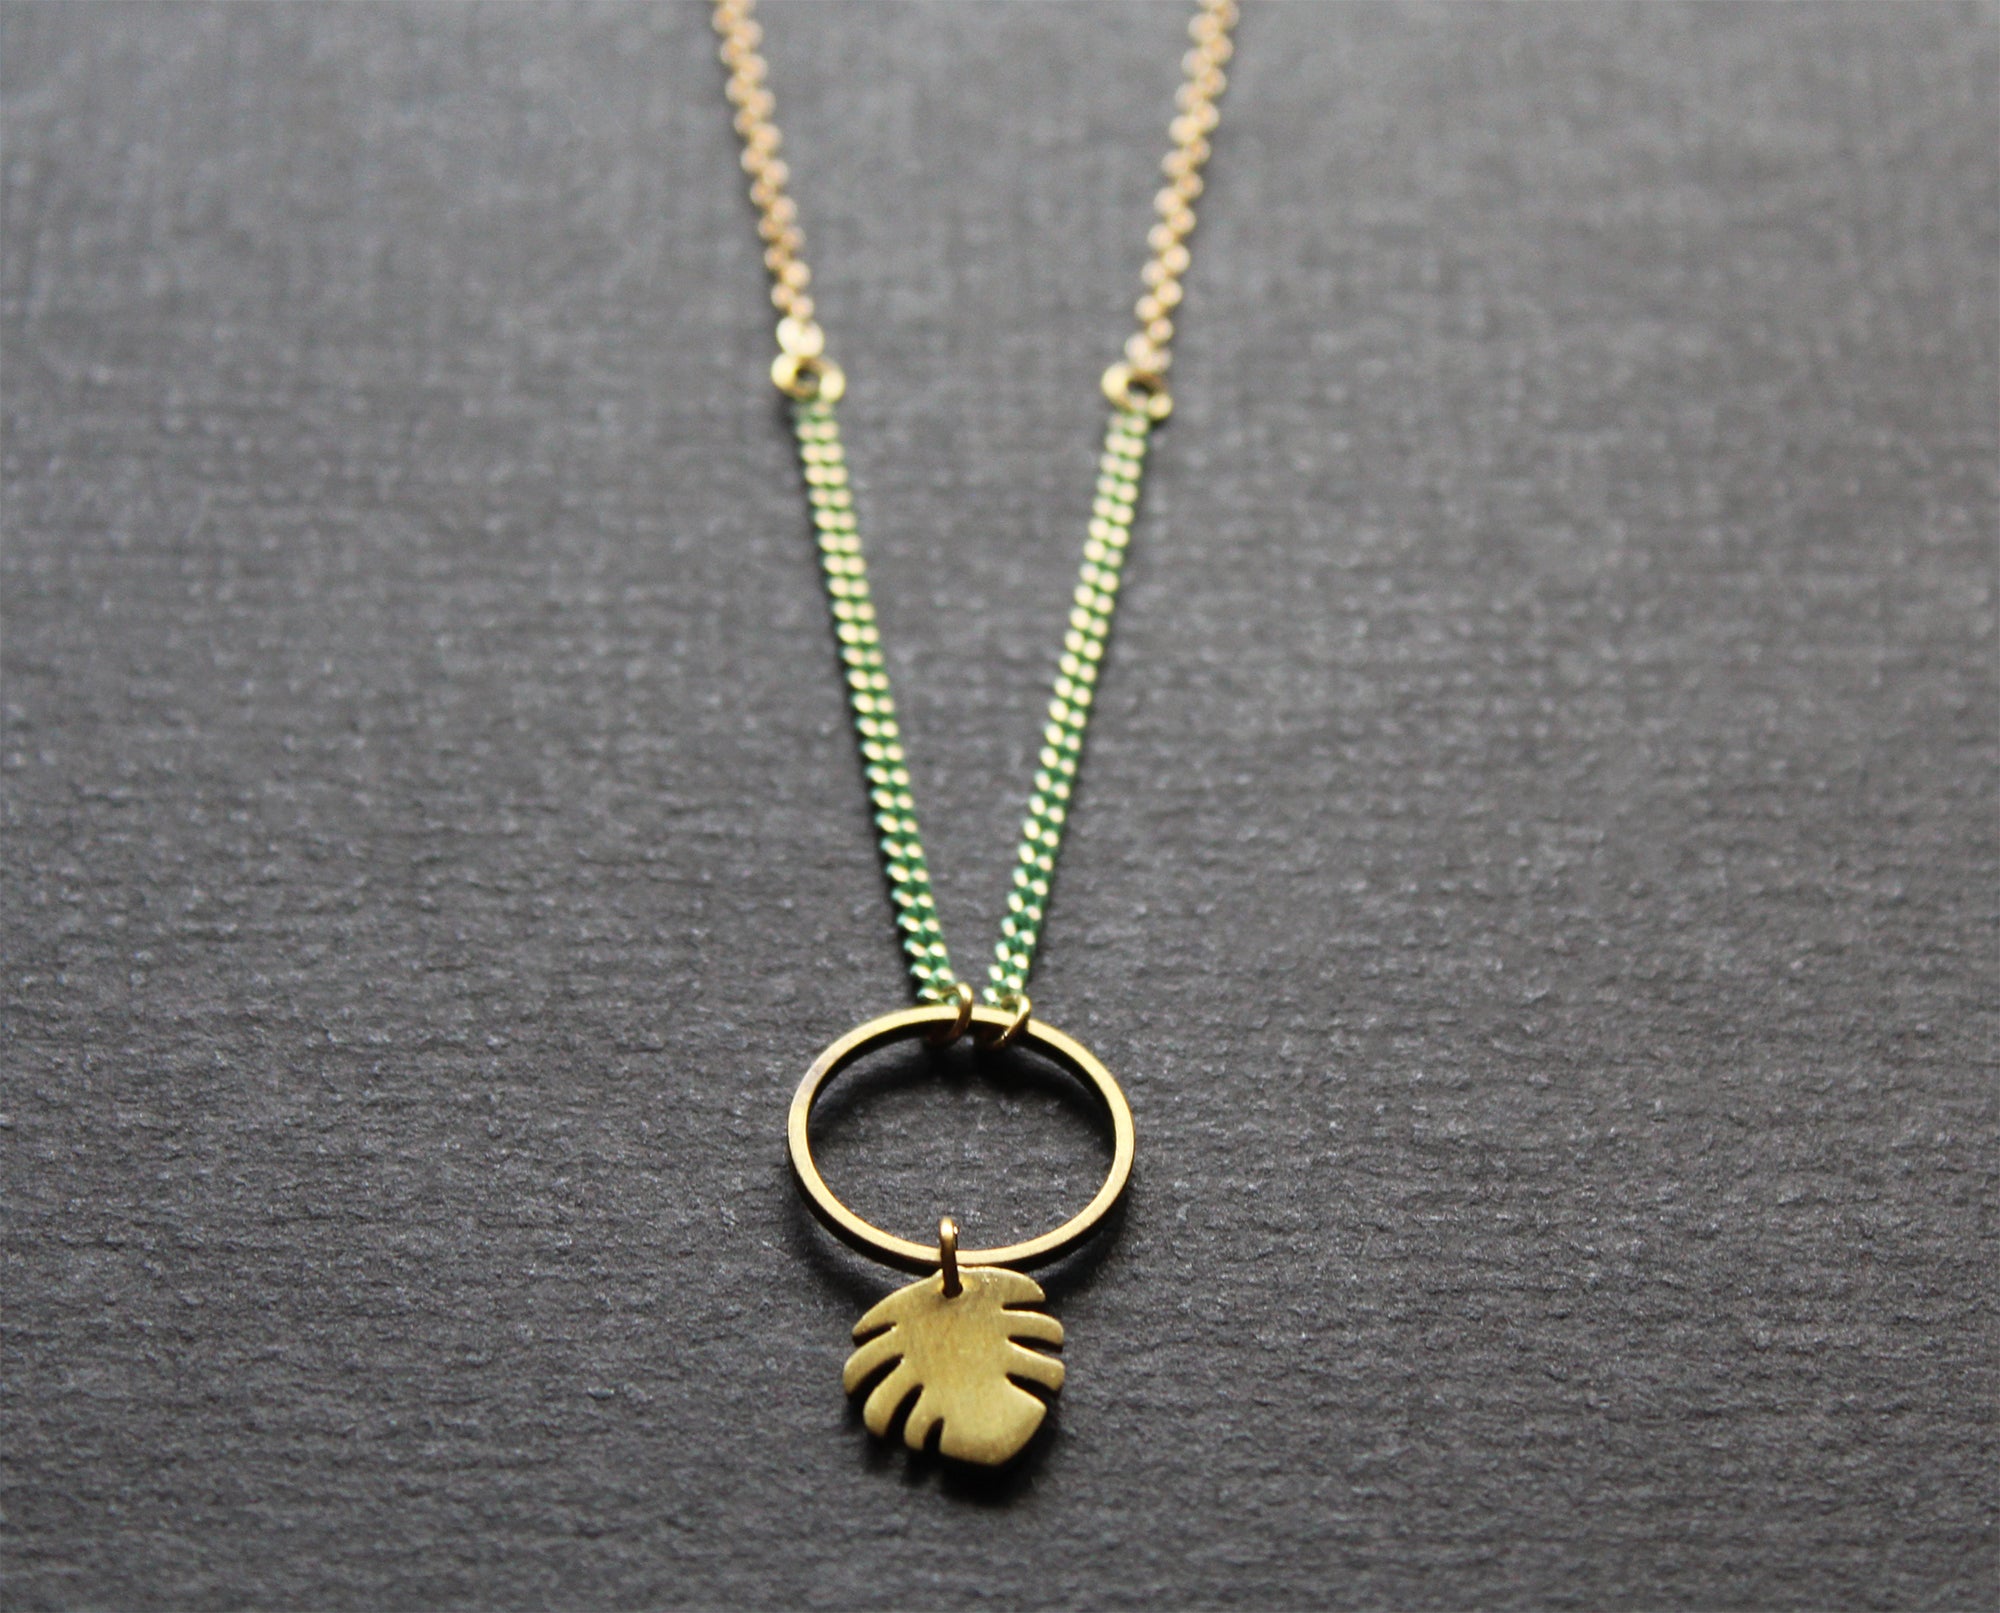 Monstera Necklace